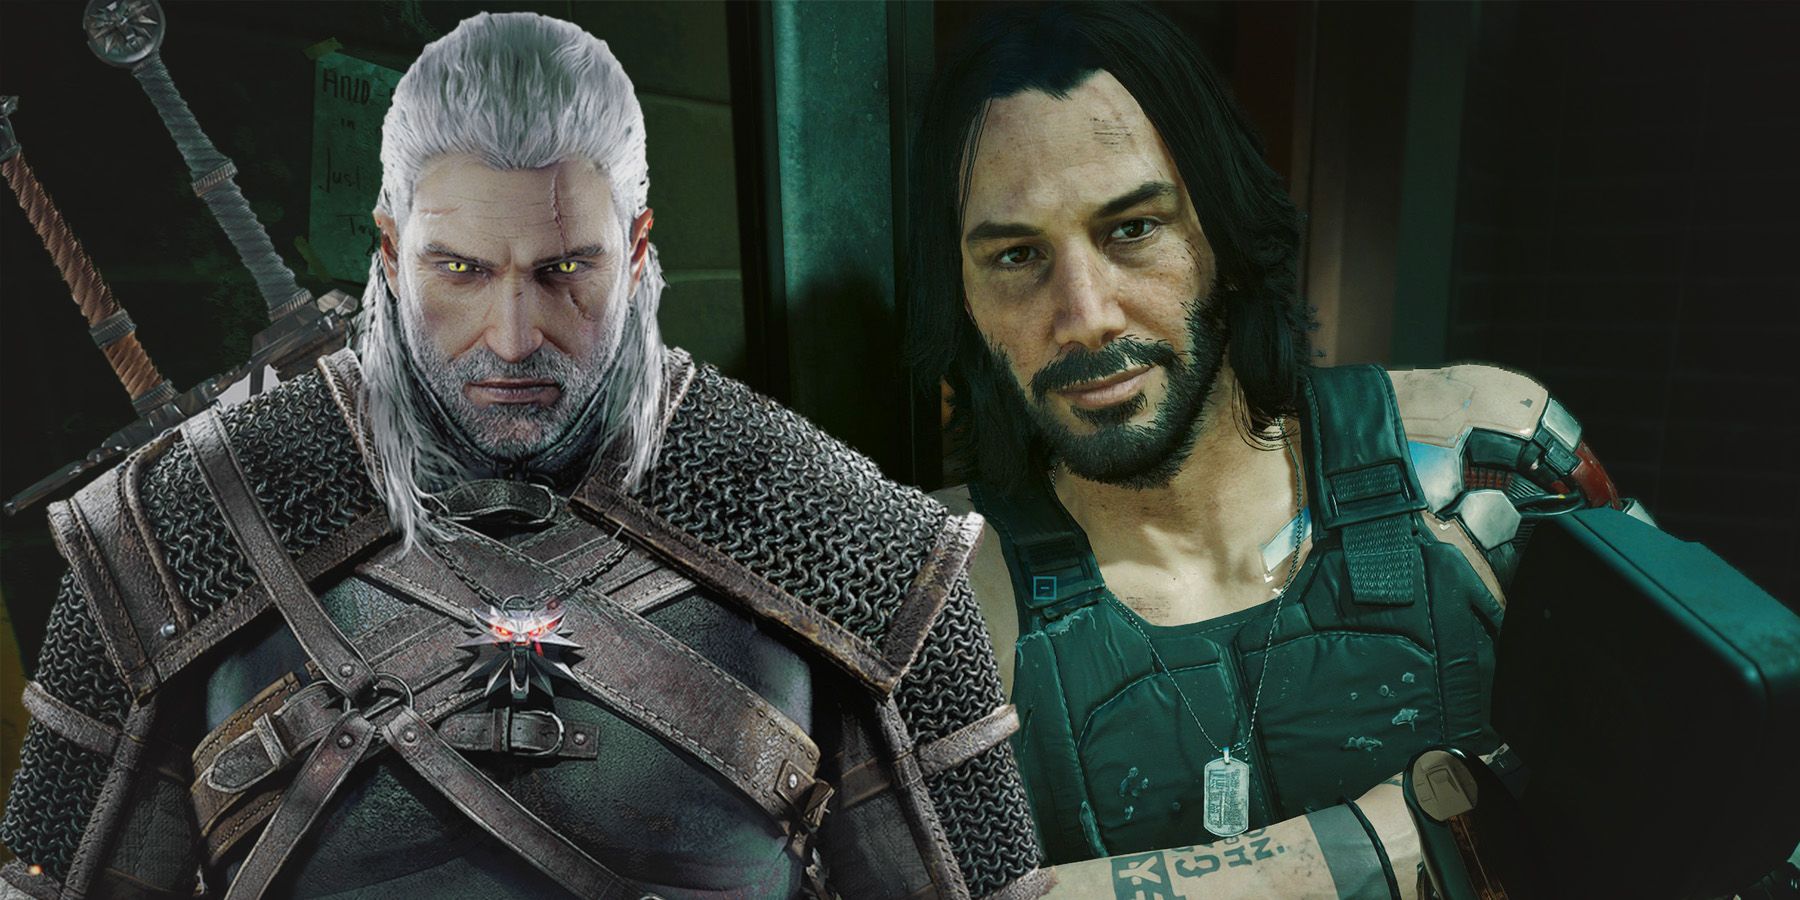 The Witcher 3 Wild Hunt Geralt of Rivia artwork next to Keanu Reeves as Johnny Silverhand leaning on wall in Cyberpunk 2077 Phantom Liberty